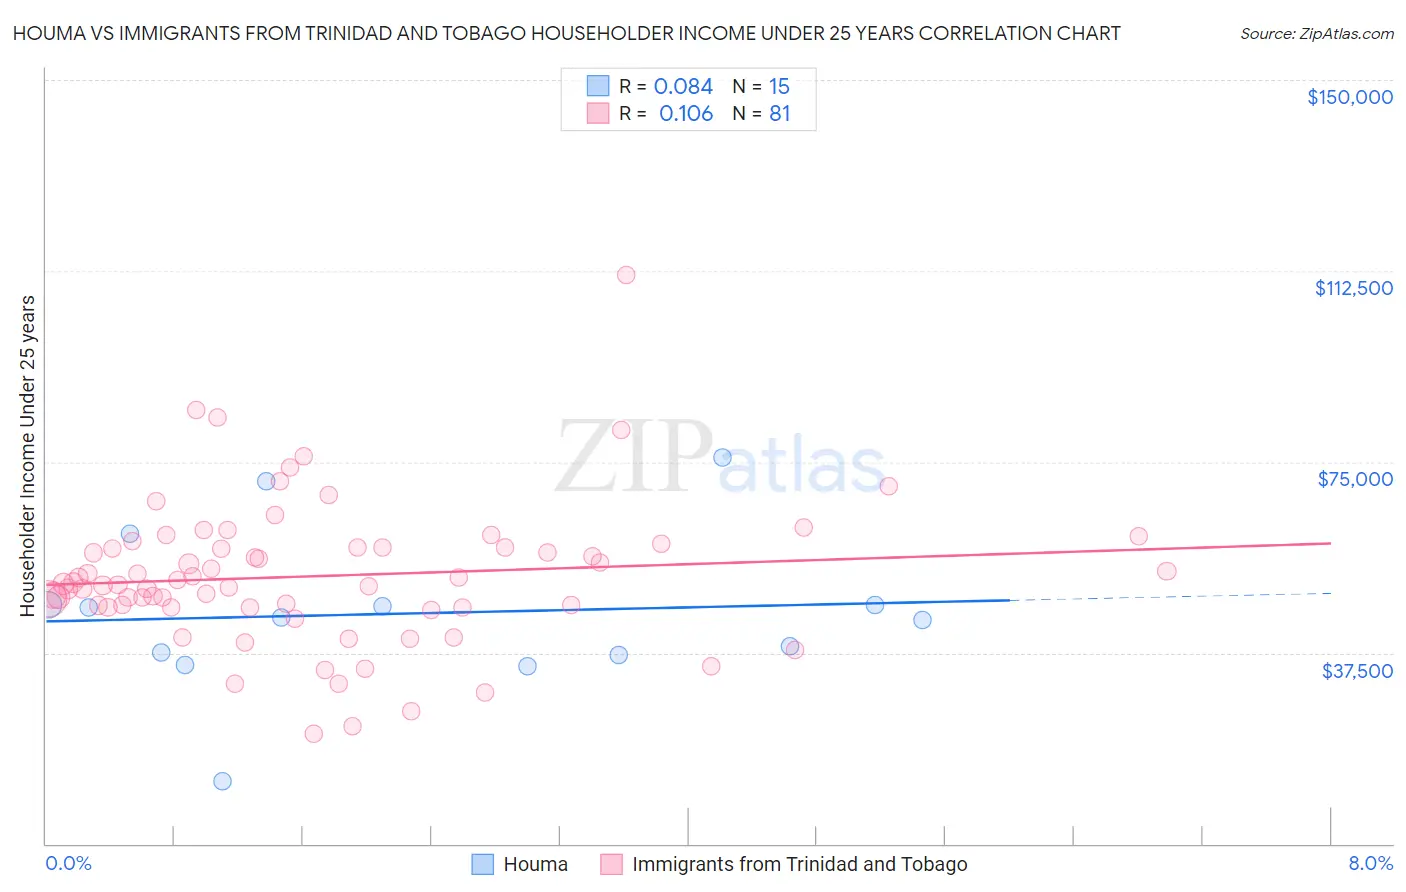 Houma vs Immigrants from Trinidad and Tobago Householder Income Under 25 years